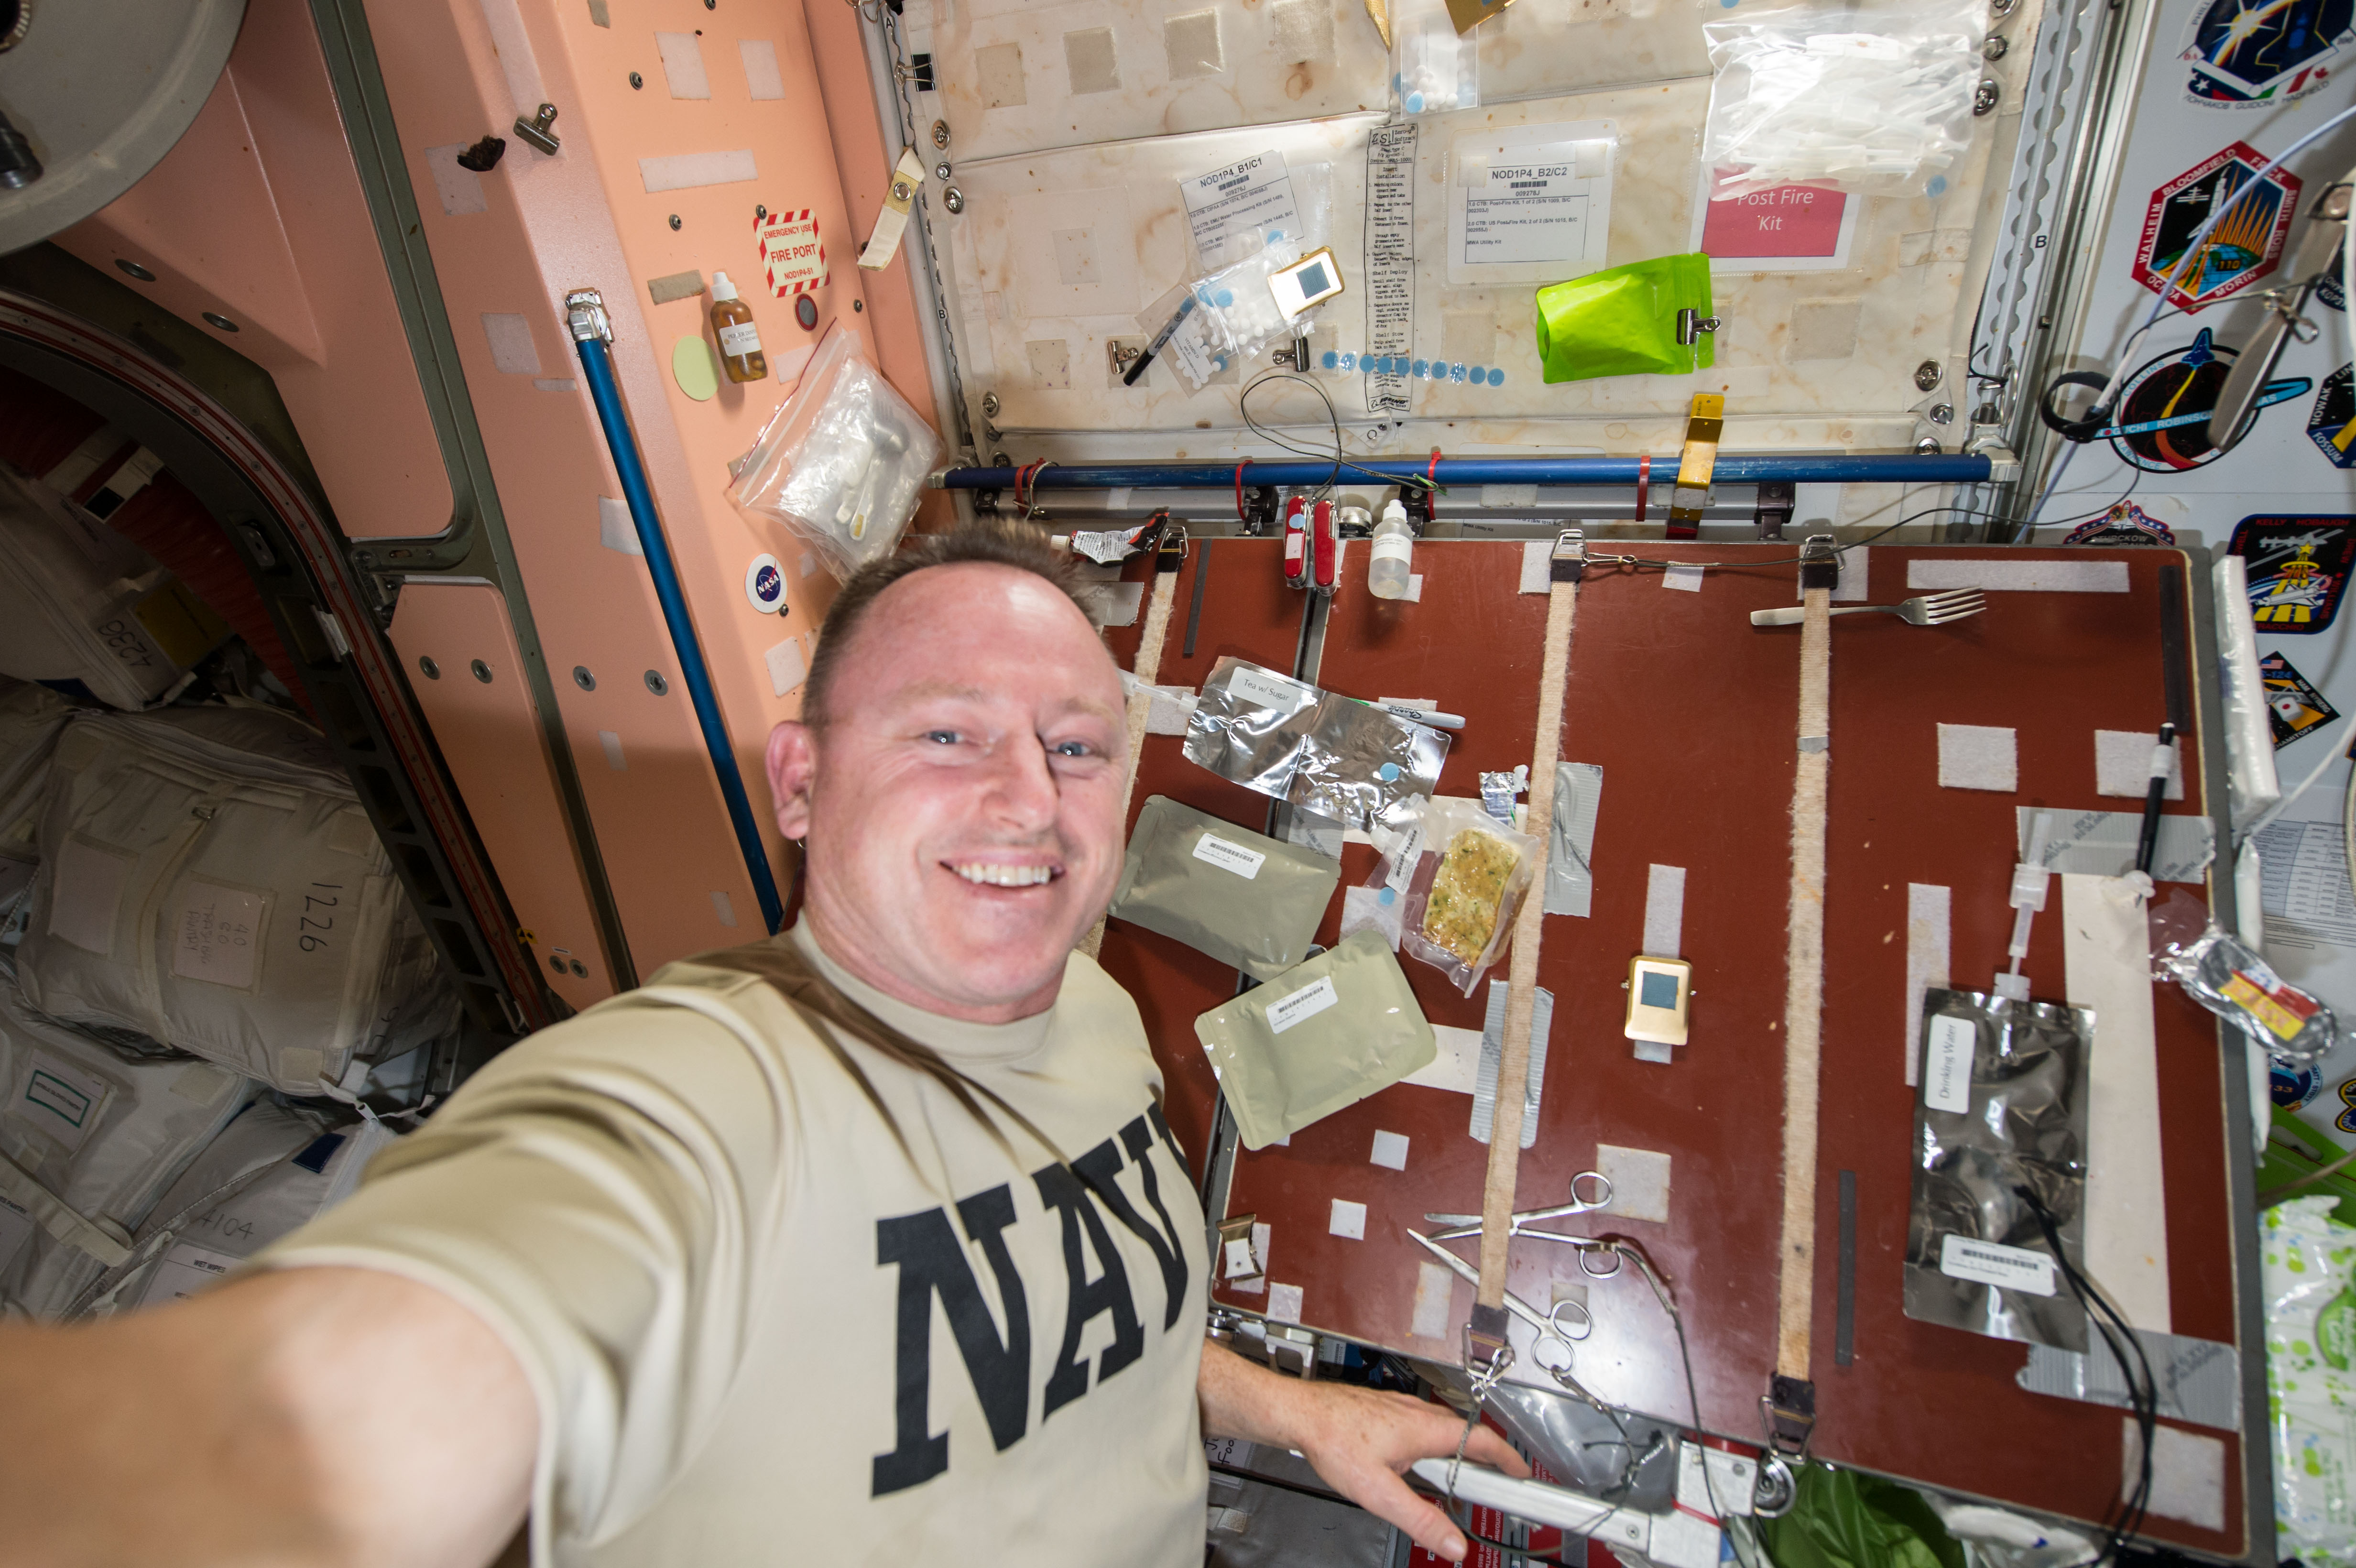 Expedition 42 commander and NASA astronaut Barry E. “Butch” Wilmore sets out his meal several days in advance